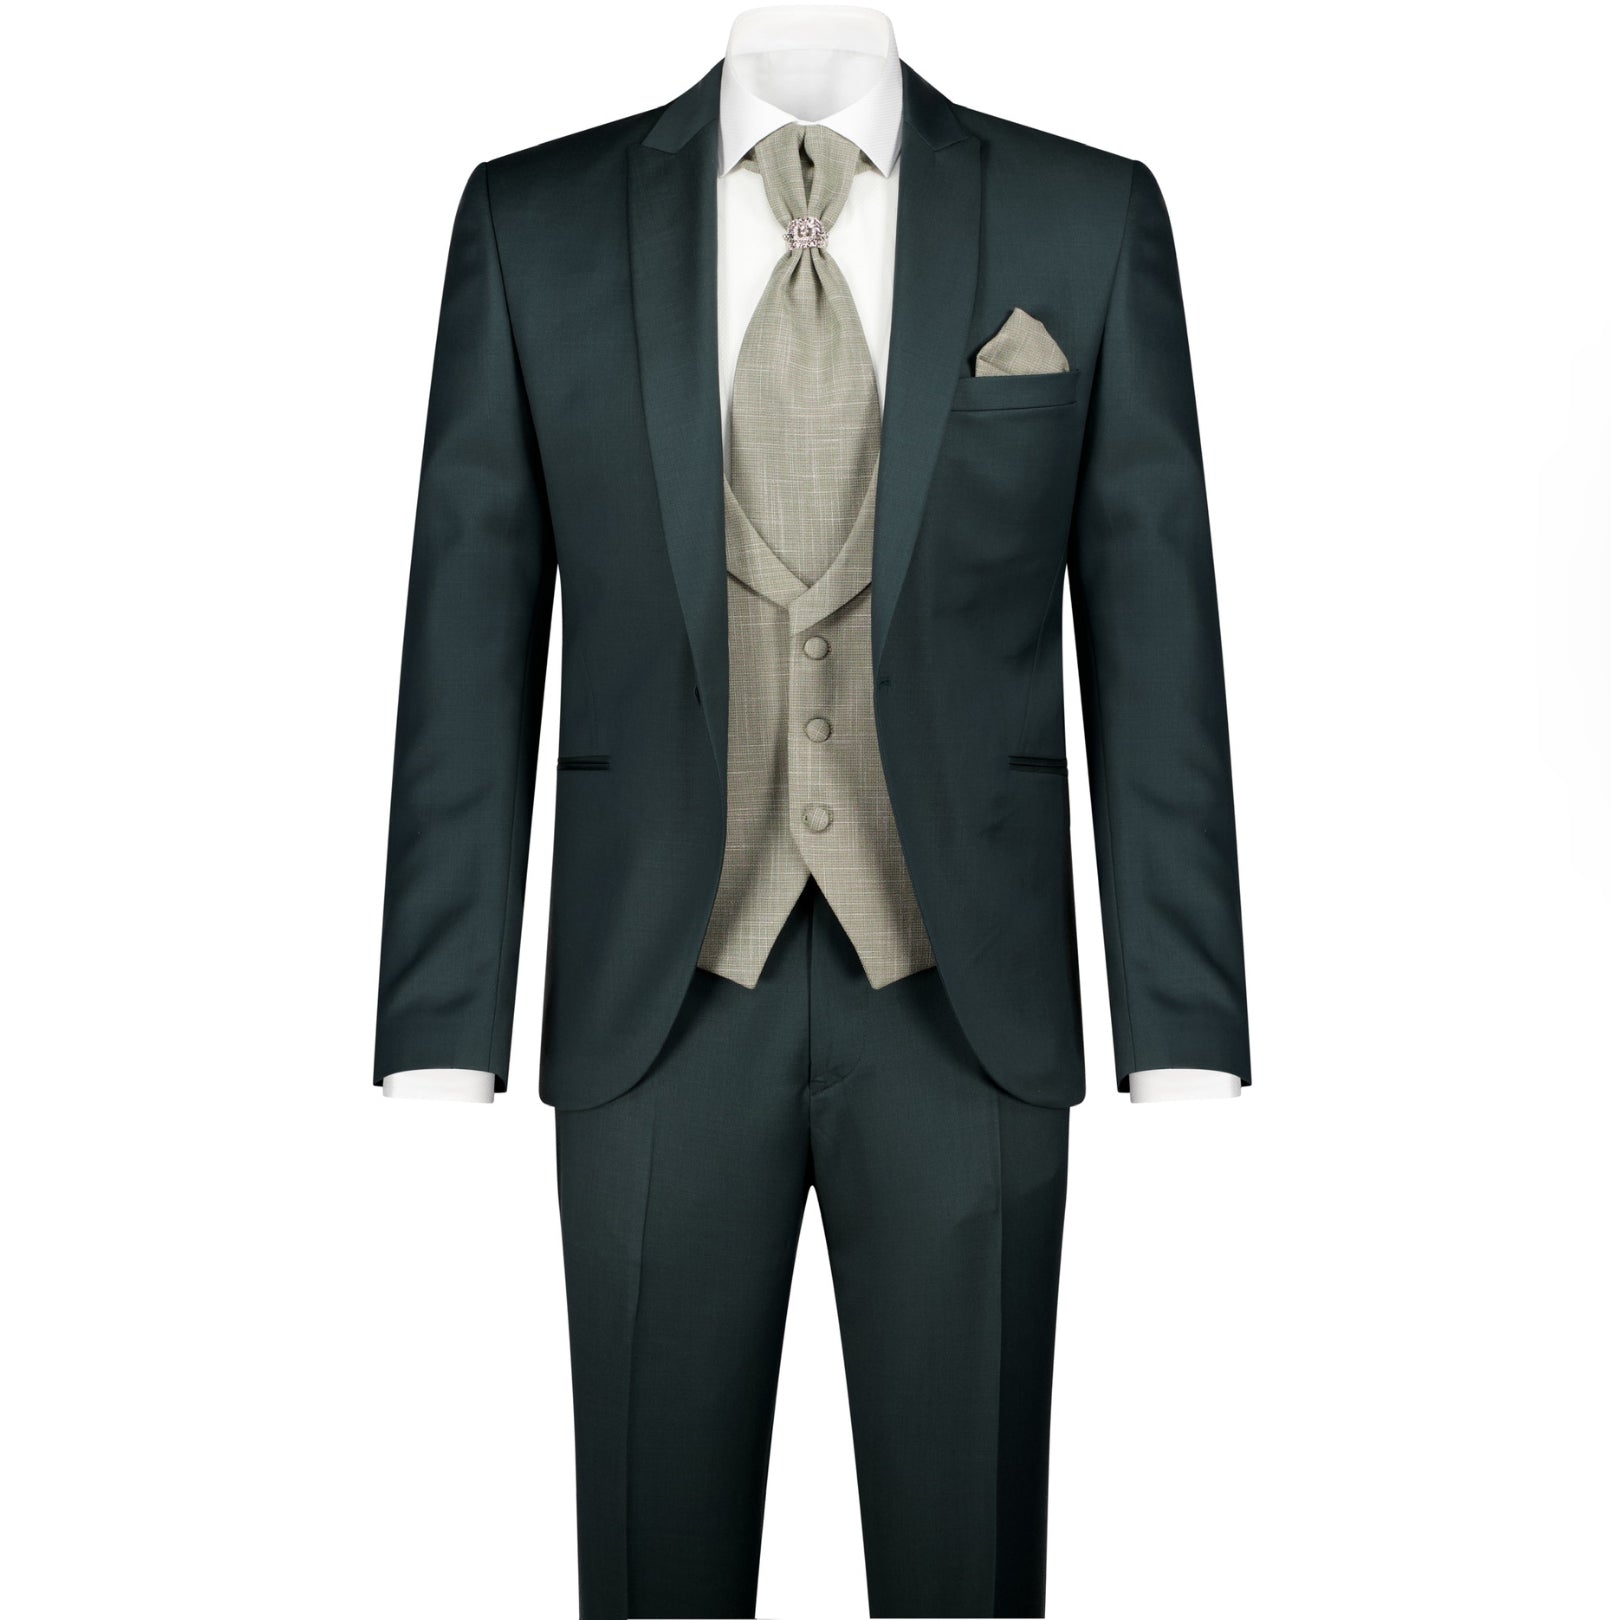 The Nasri Suit